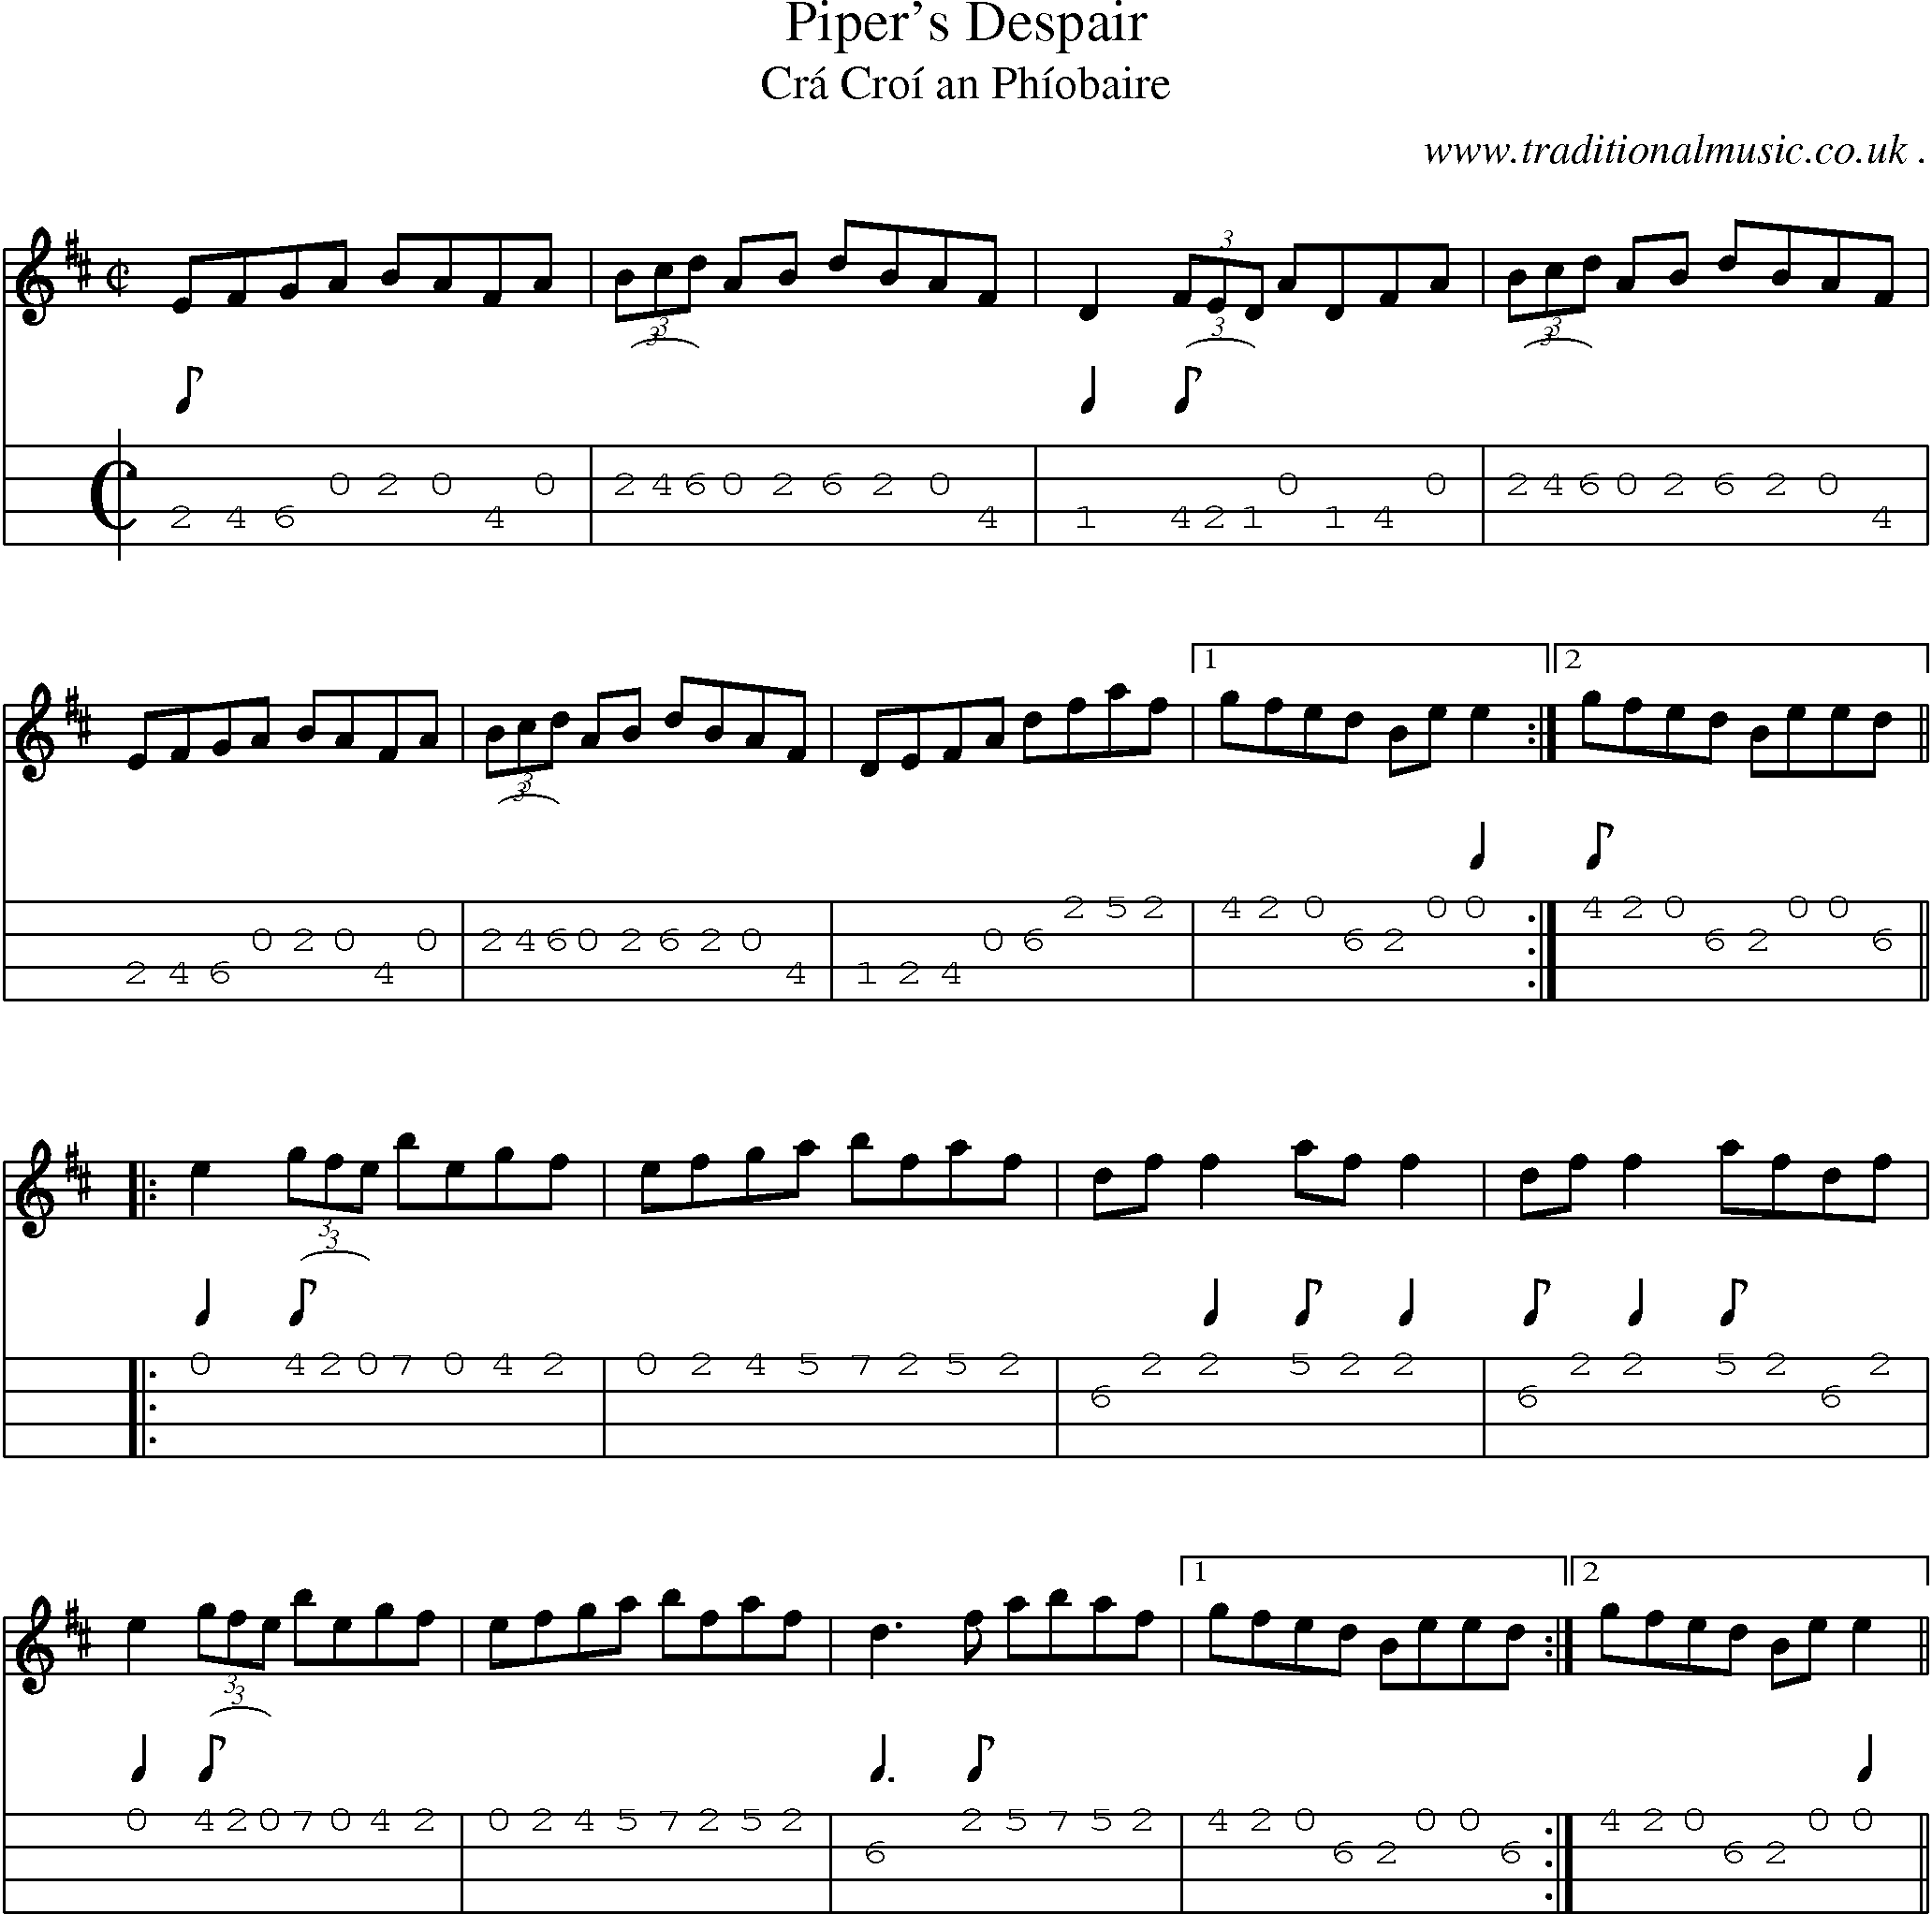 Sheet-Music and Mandolin Tabs for Pipers Despair